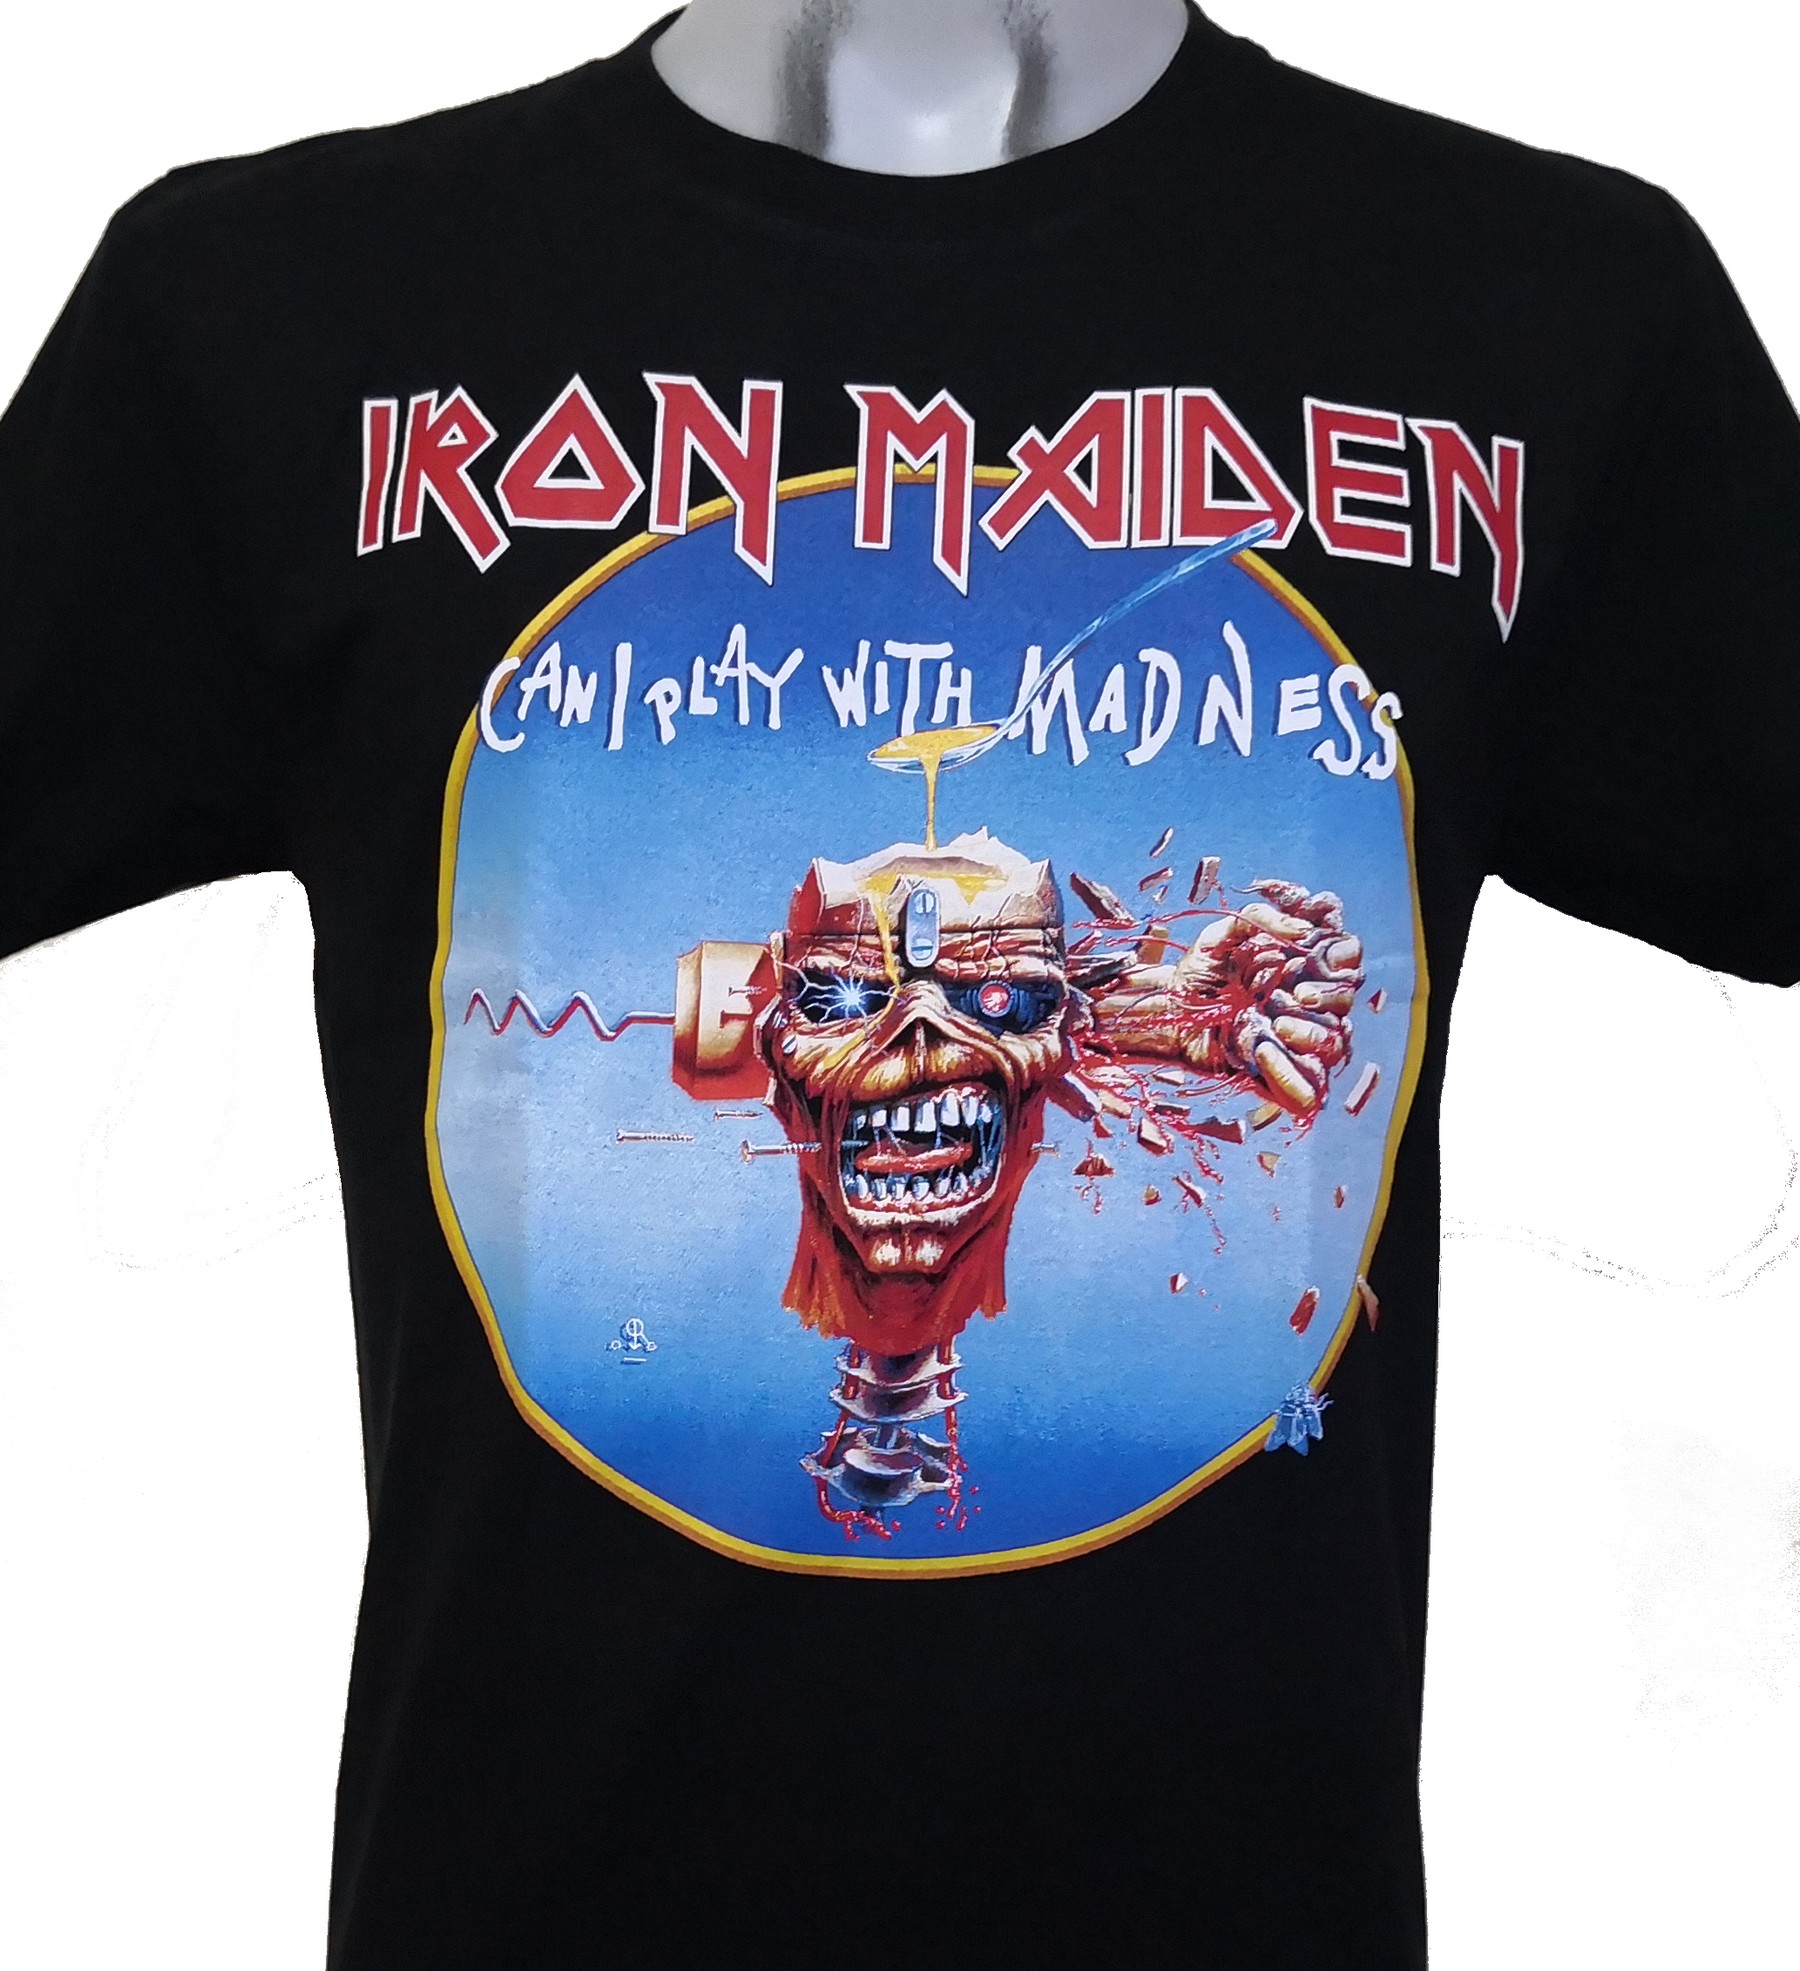 Iron Maiden T Shirt Can I Play With Madness Size L Roxxbkk